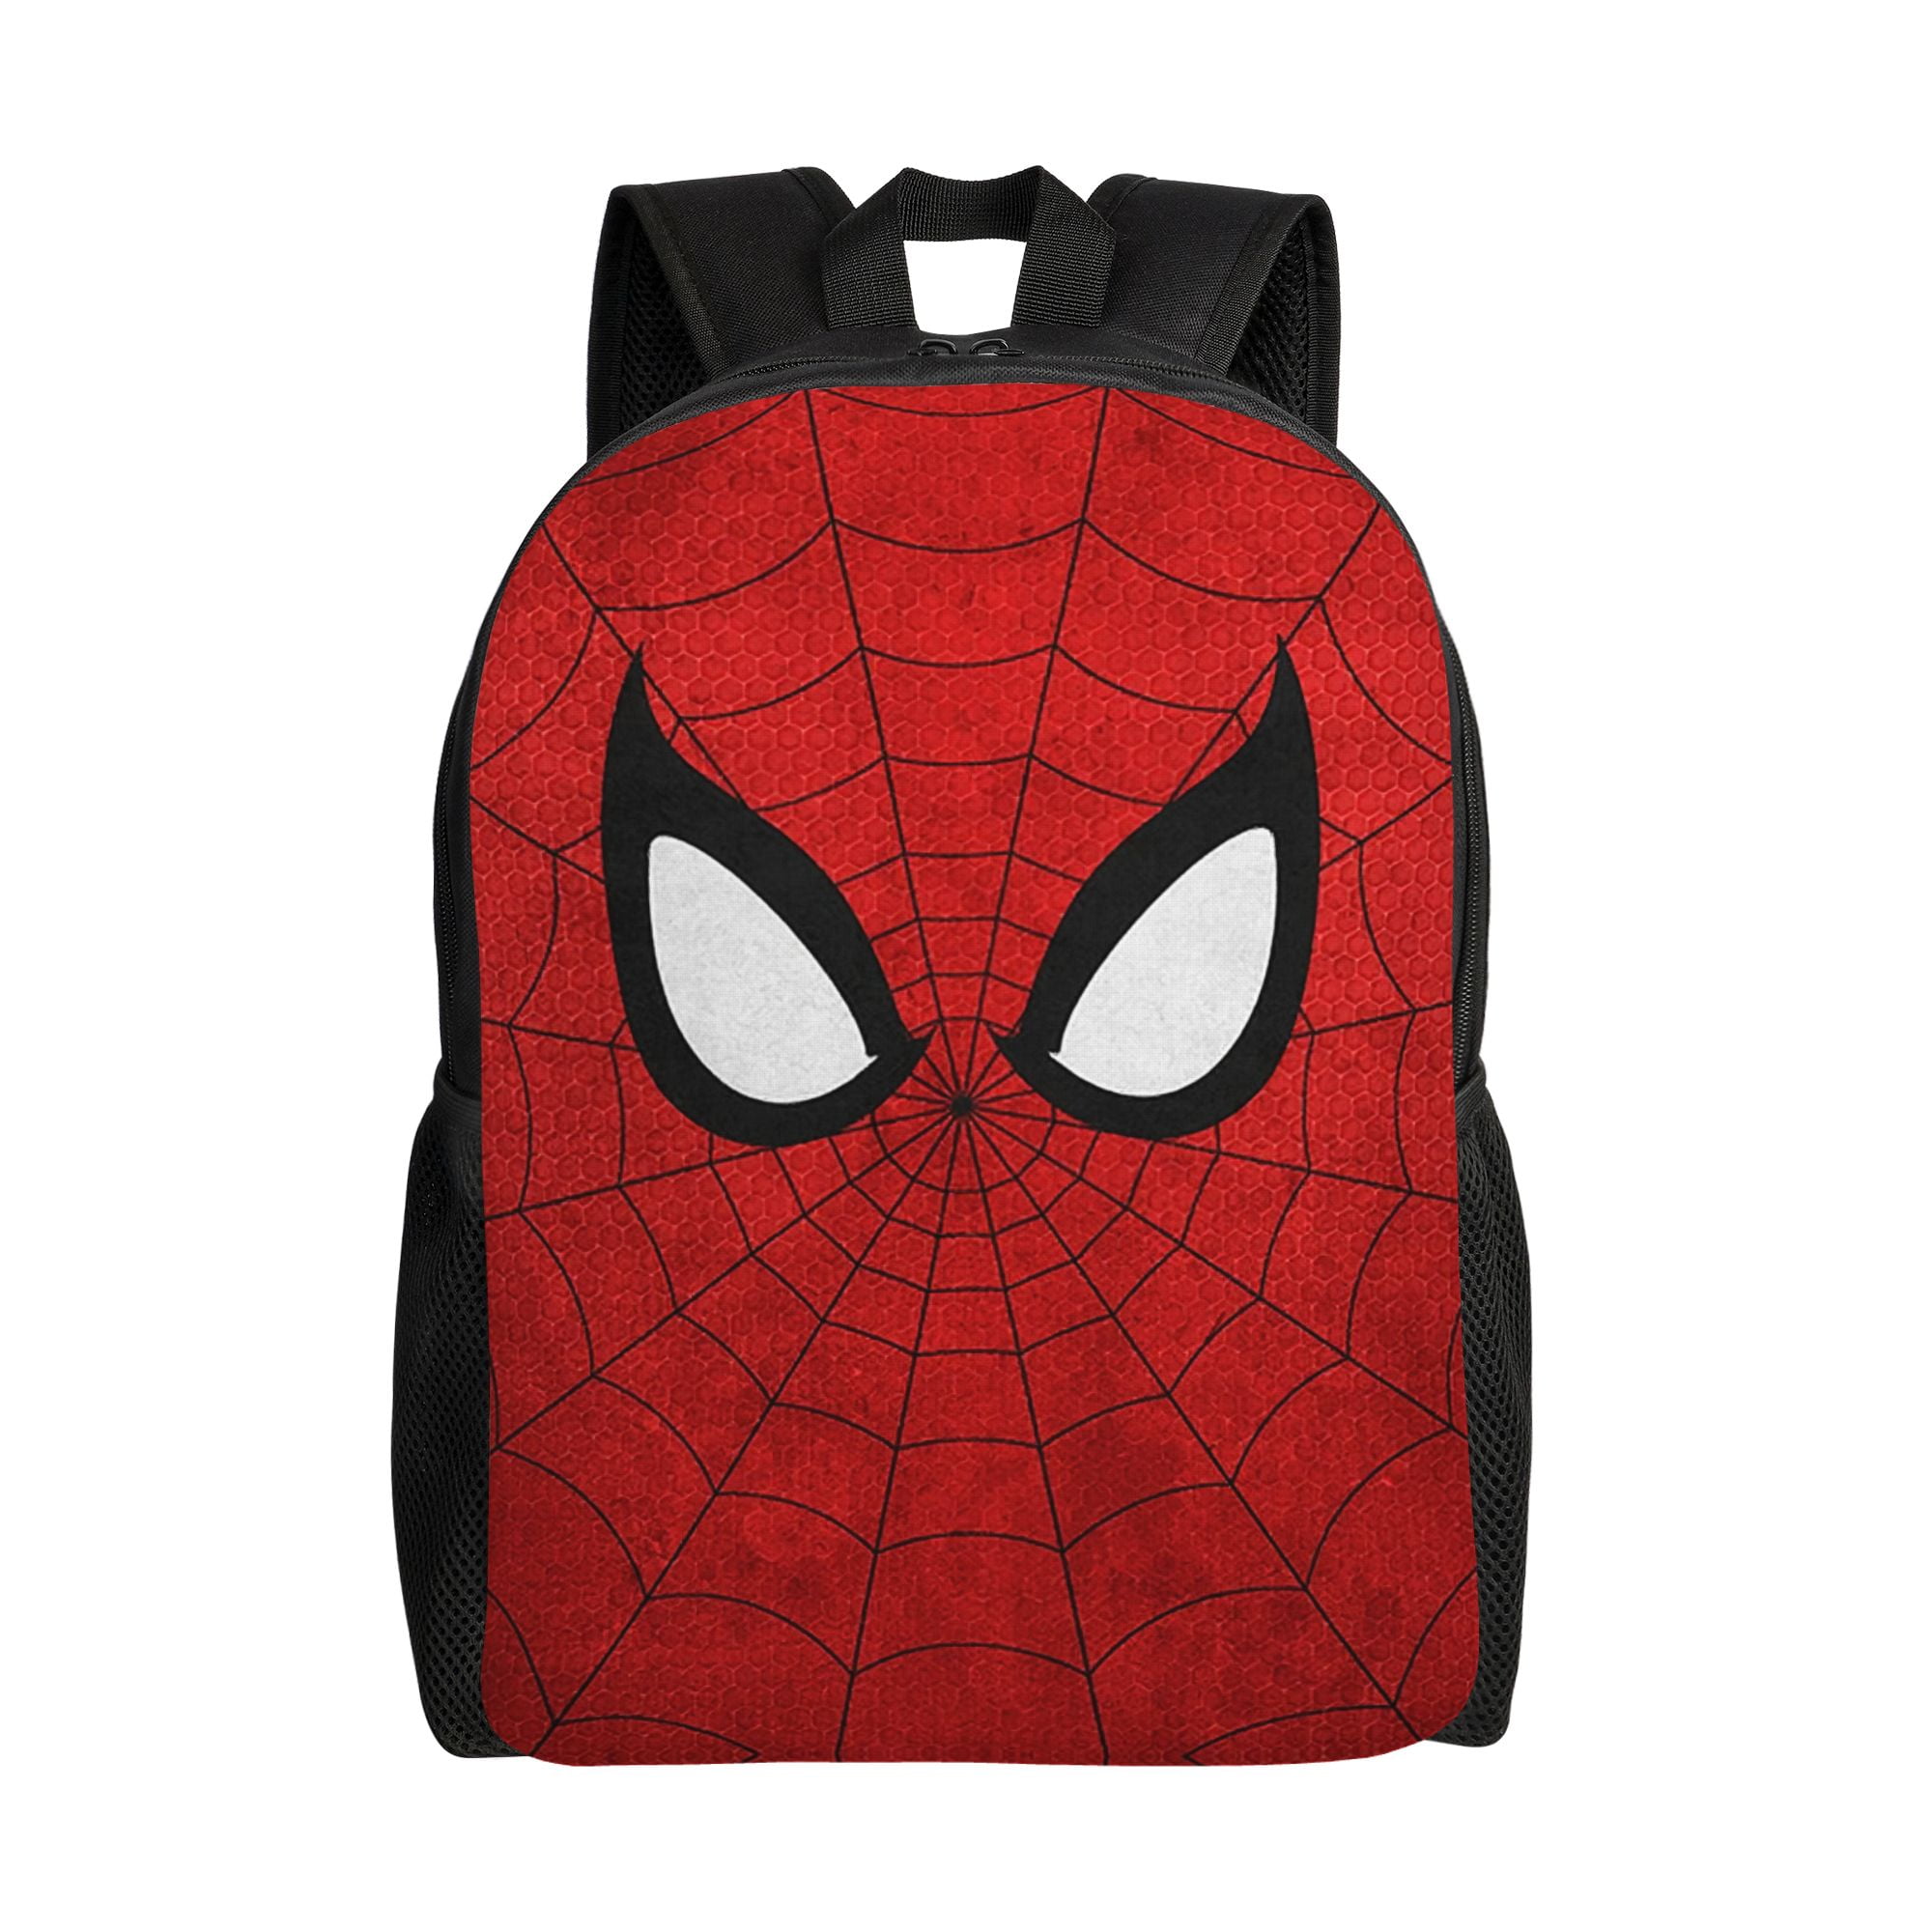 Spider Man Backpack, Adult Kids Simple Lightweight Casual Backpack for ...